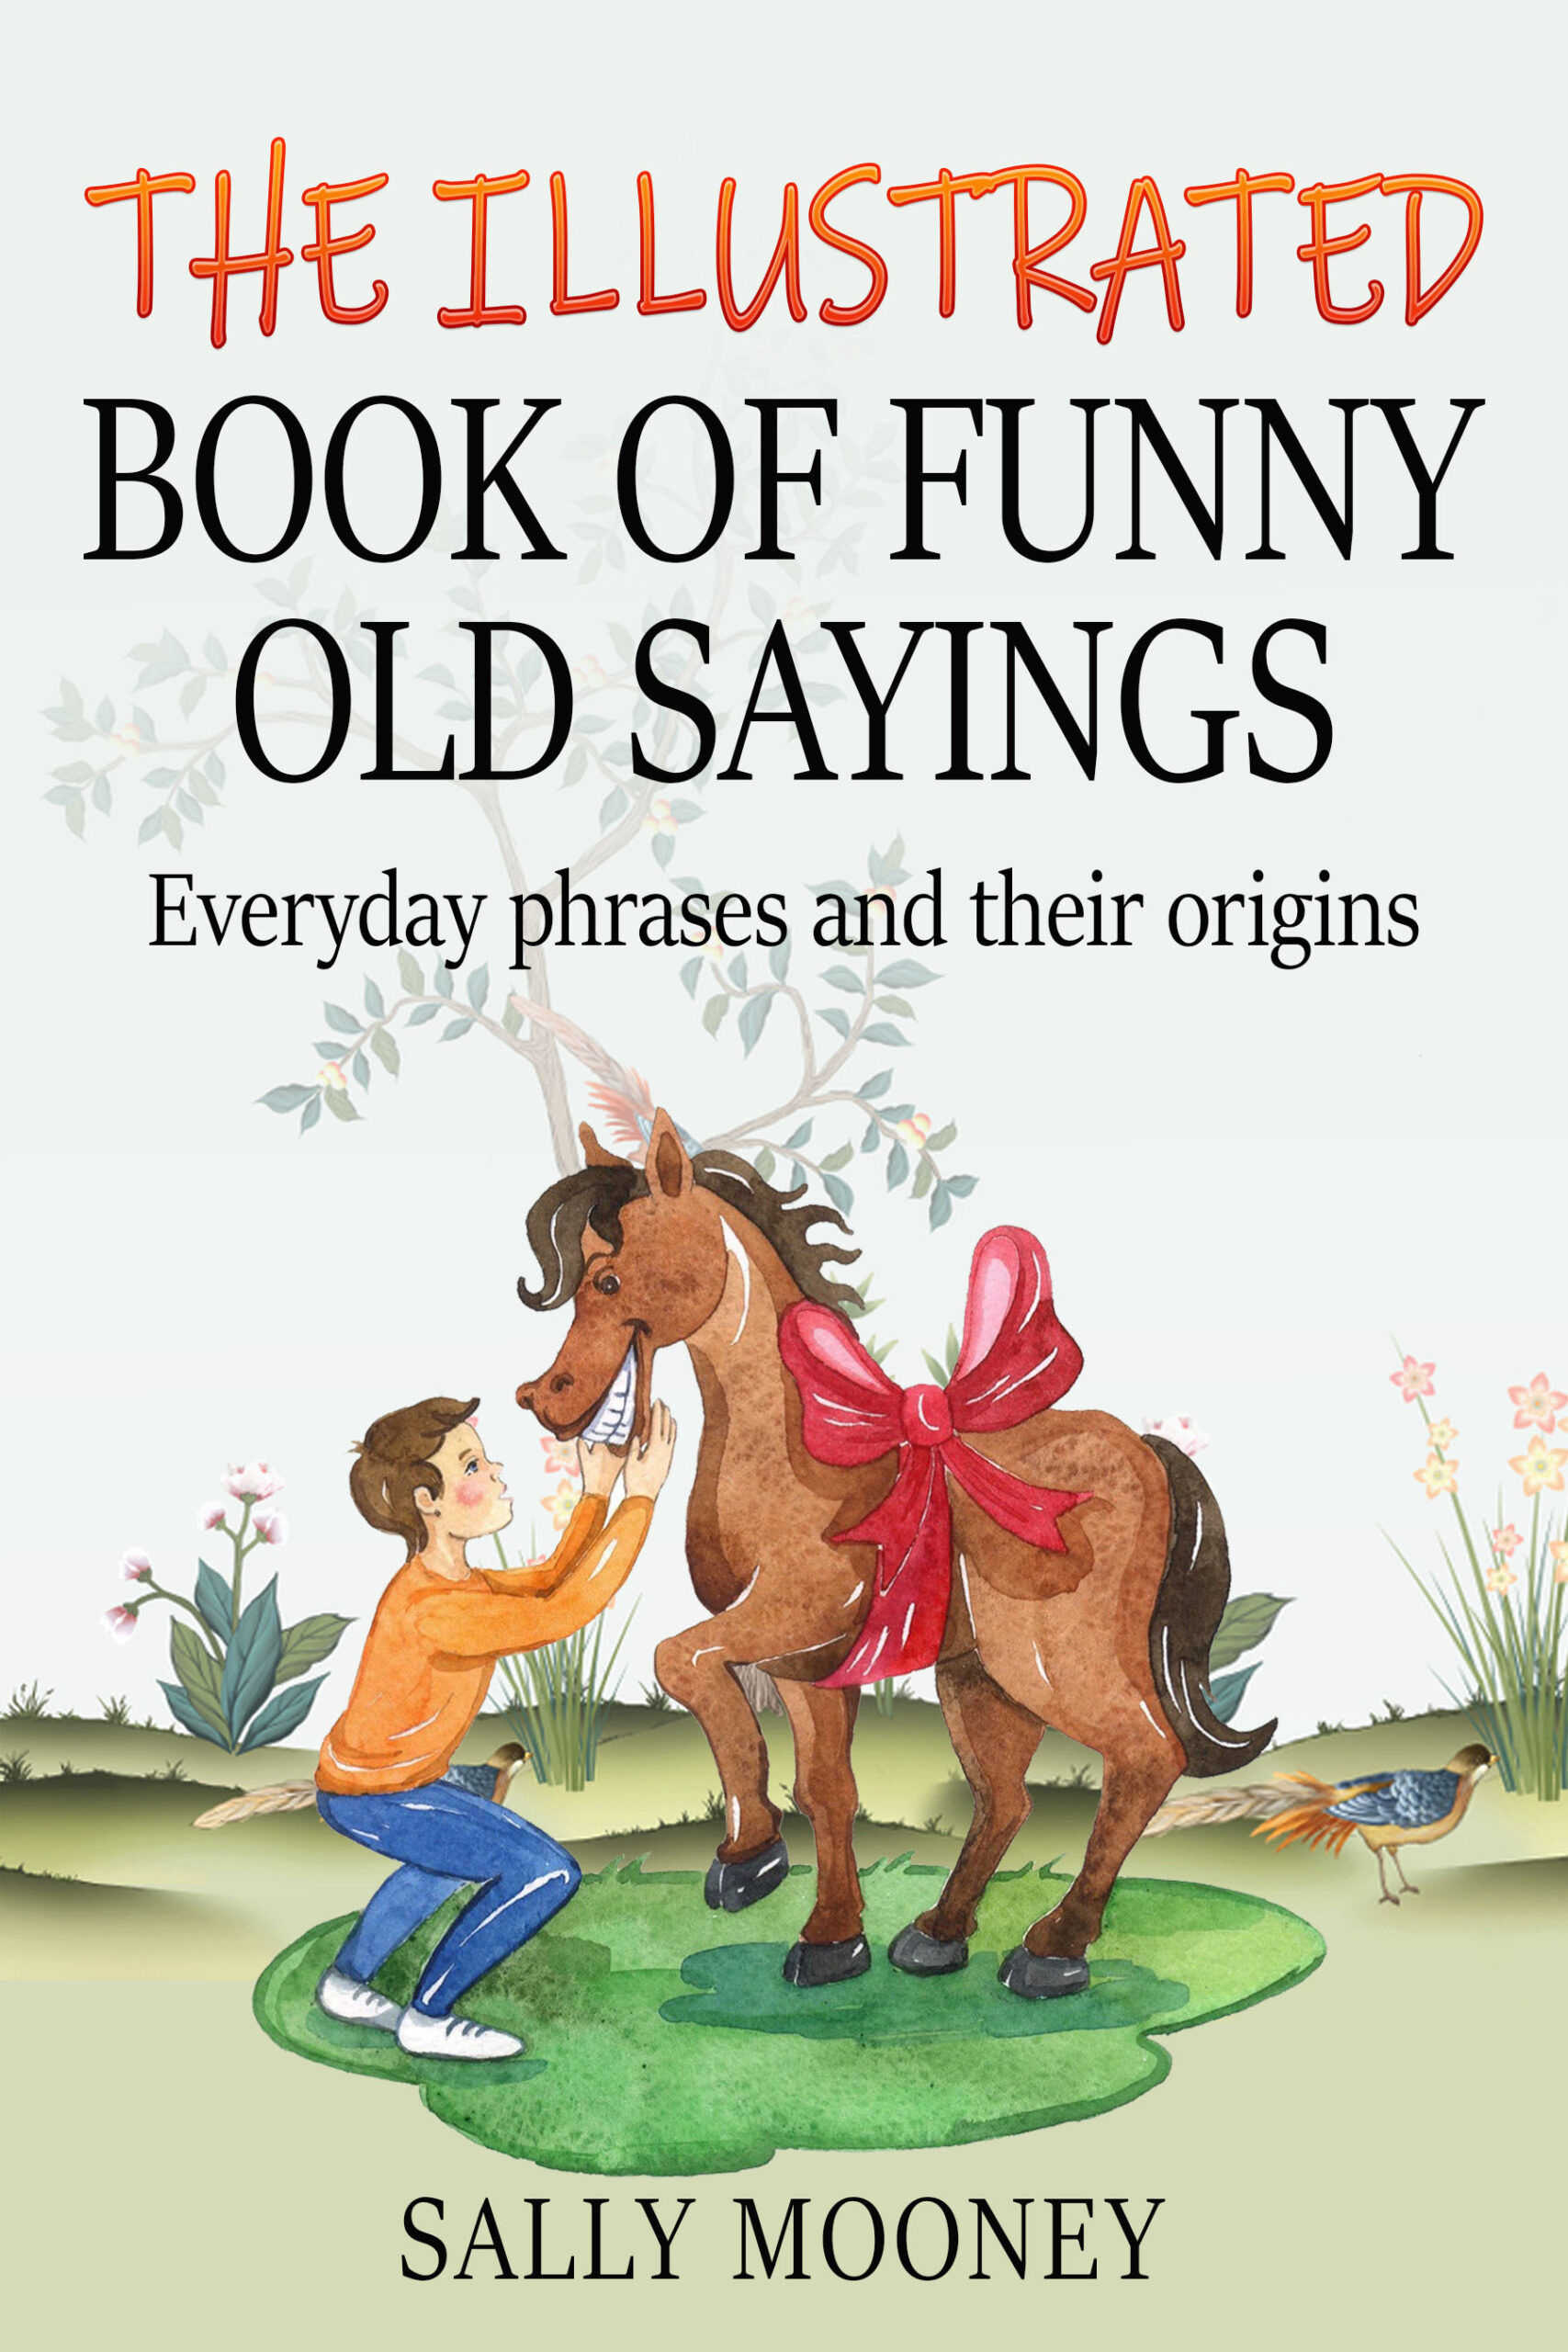 FREE: The Illustrated Book of Funny Old Sayings by Sally Mooney